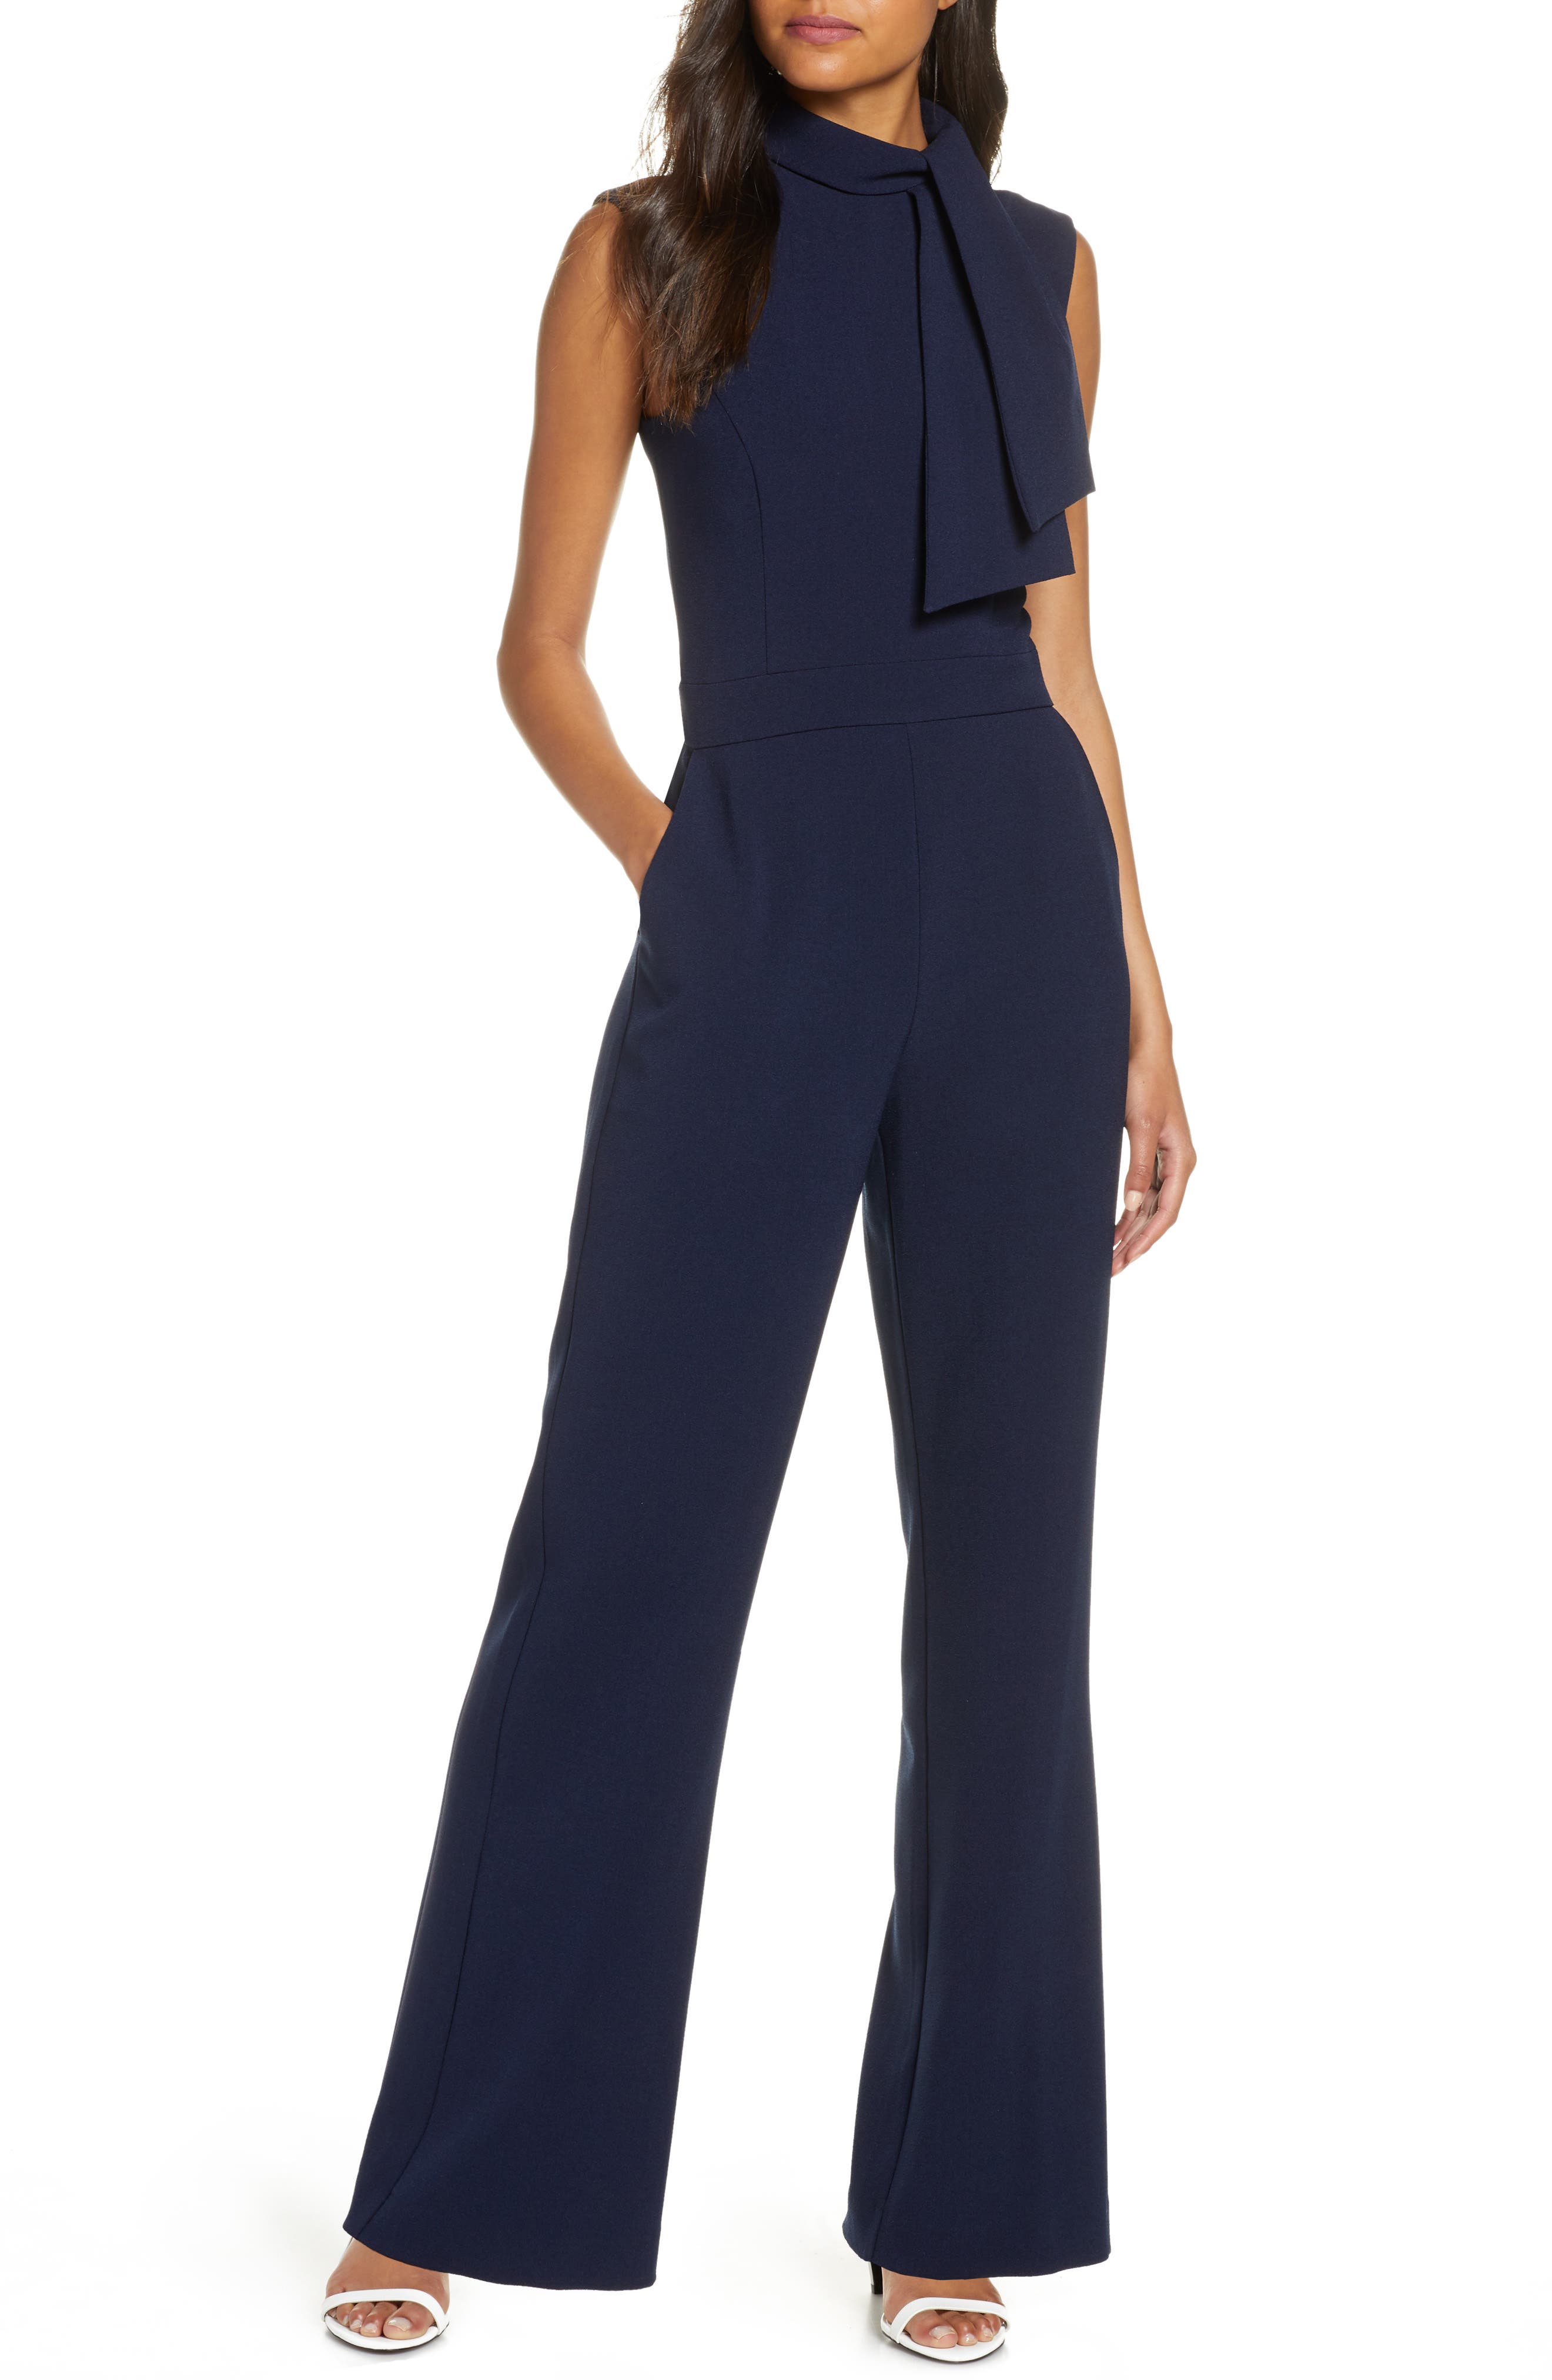 petite dressy jumpsuits for wedding guest